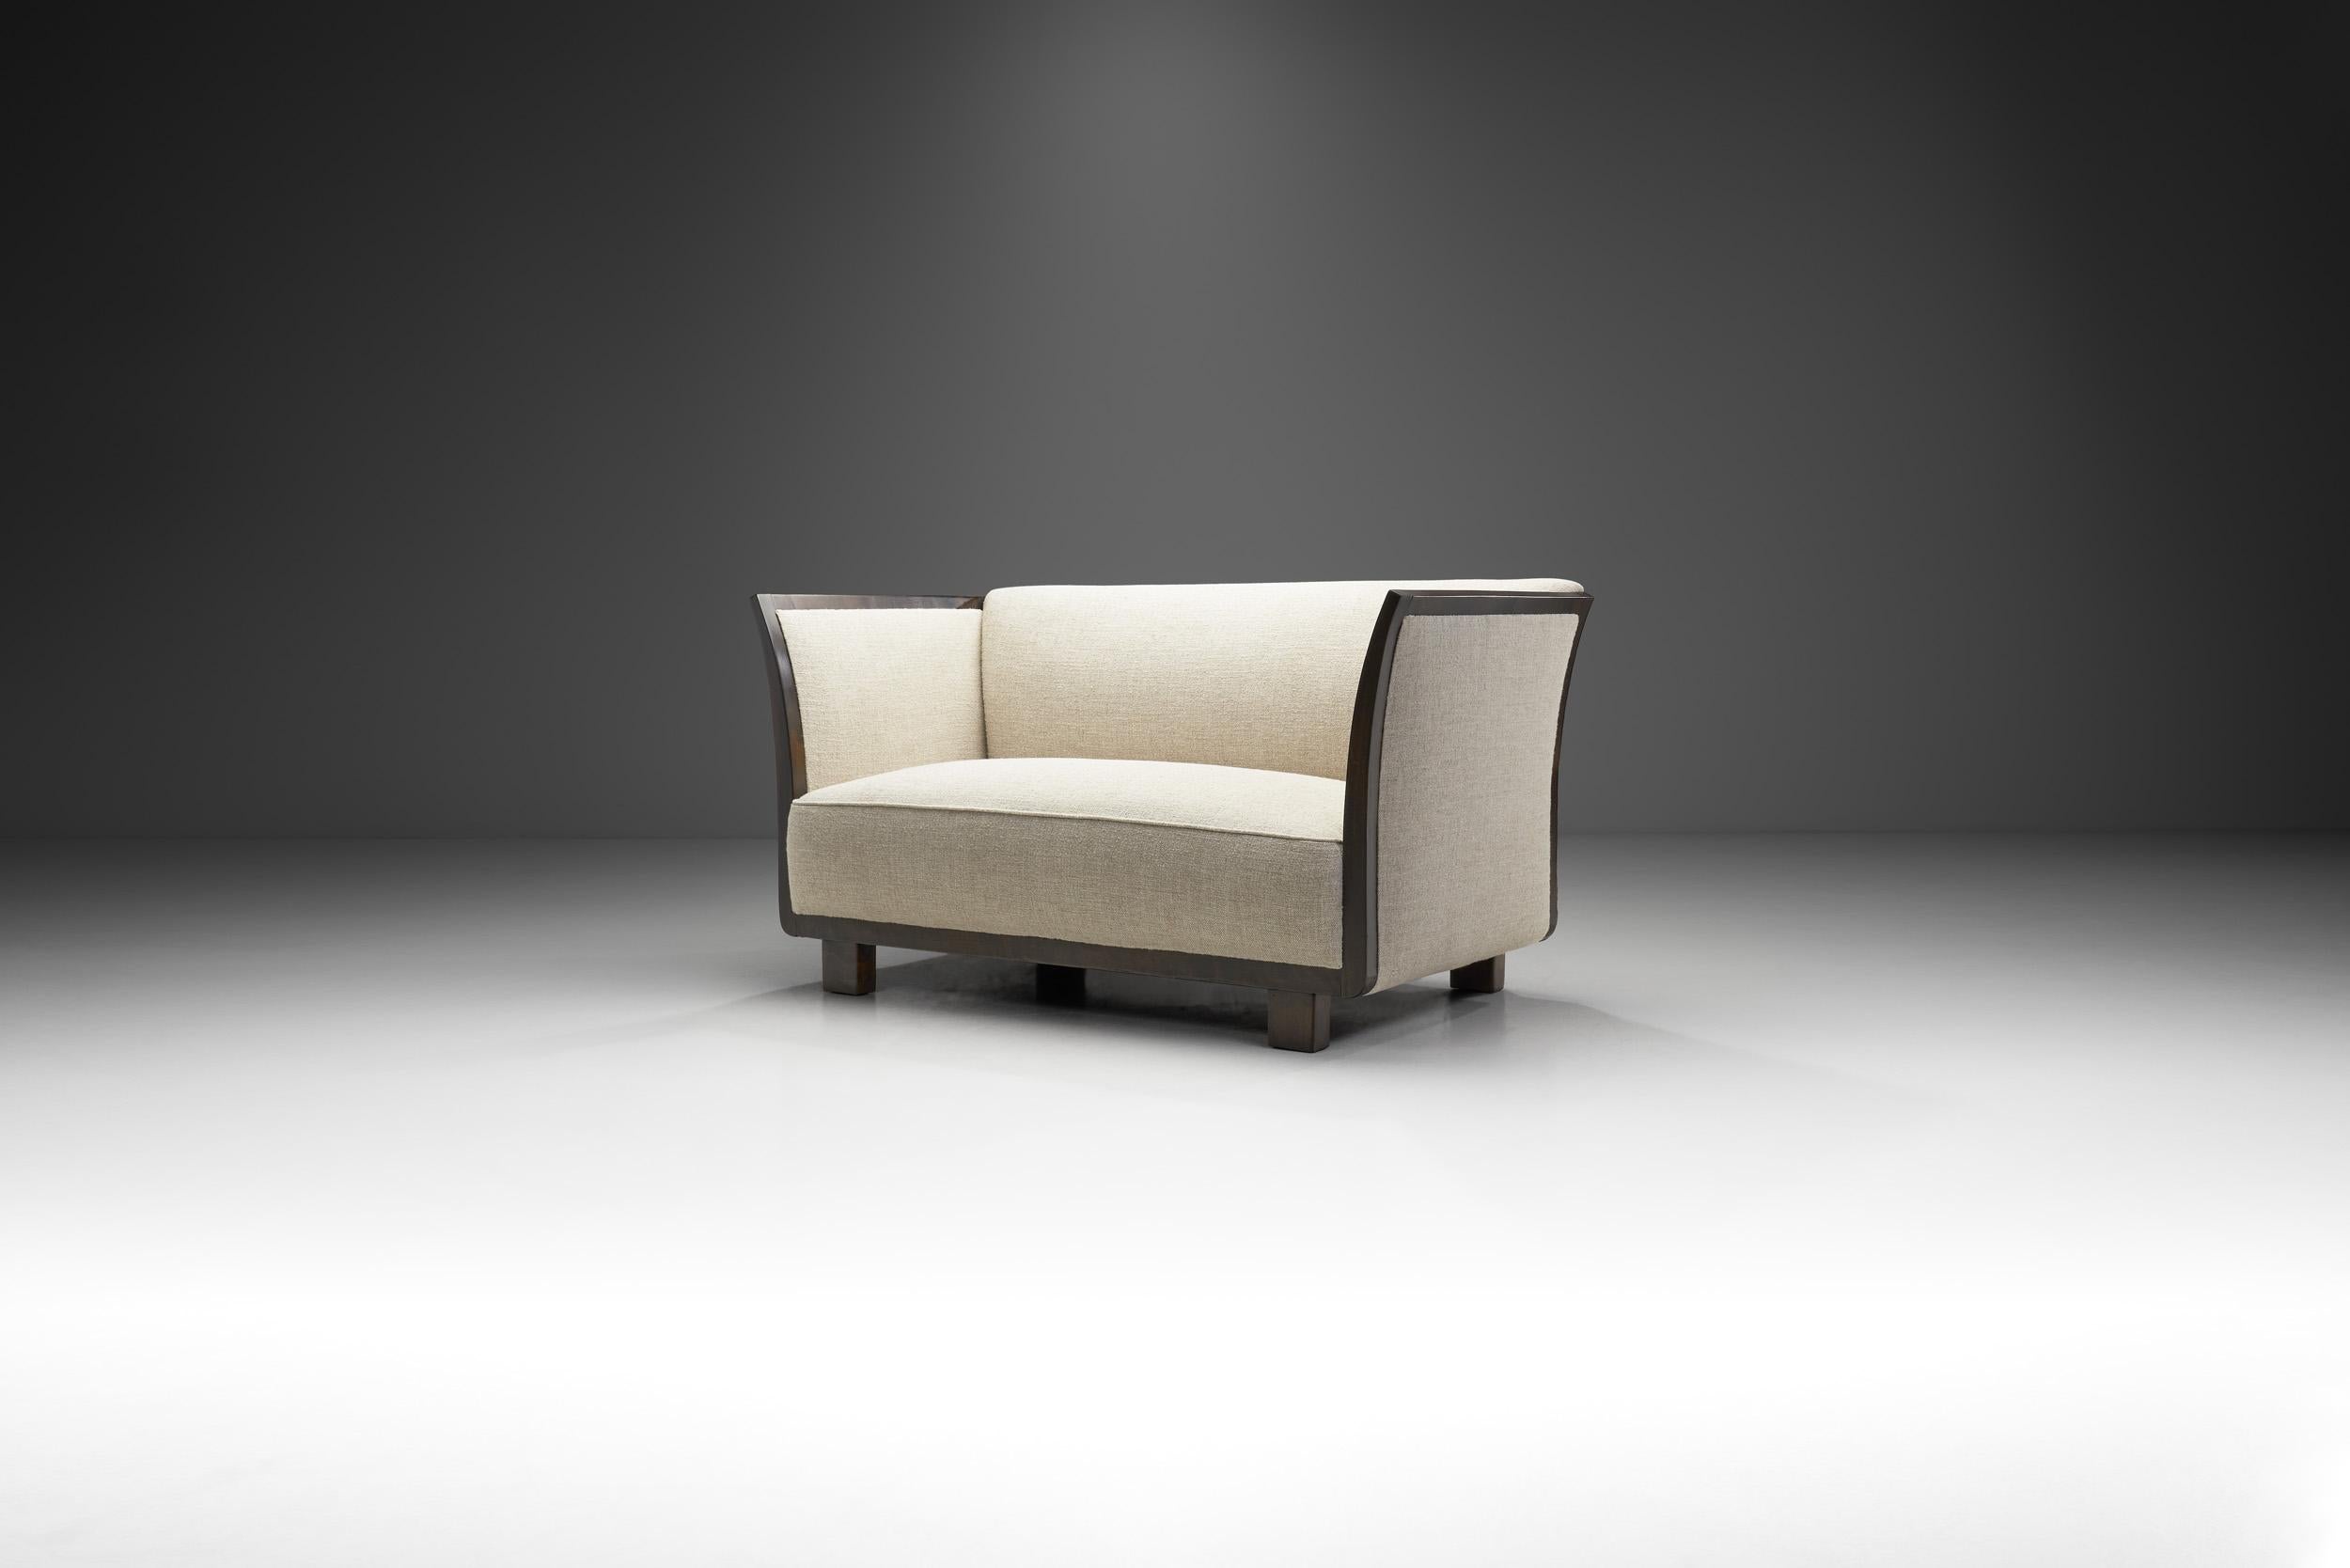 This two-seater Danish sofa has an elegant, modern edge that is unmistakeable of the era. The design features clean, sharp angles and rounded lines to create a perfect balance that shows why Danish cabinetmakers are still widely renowned